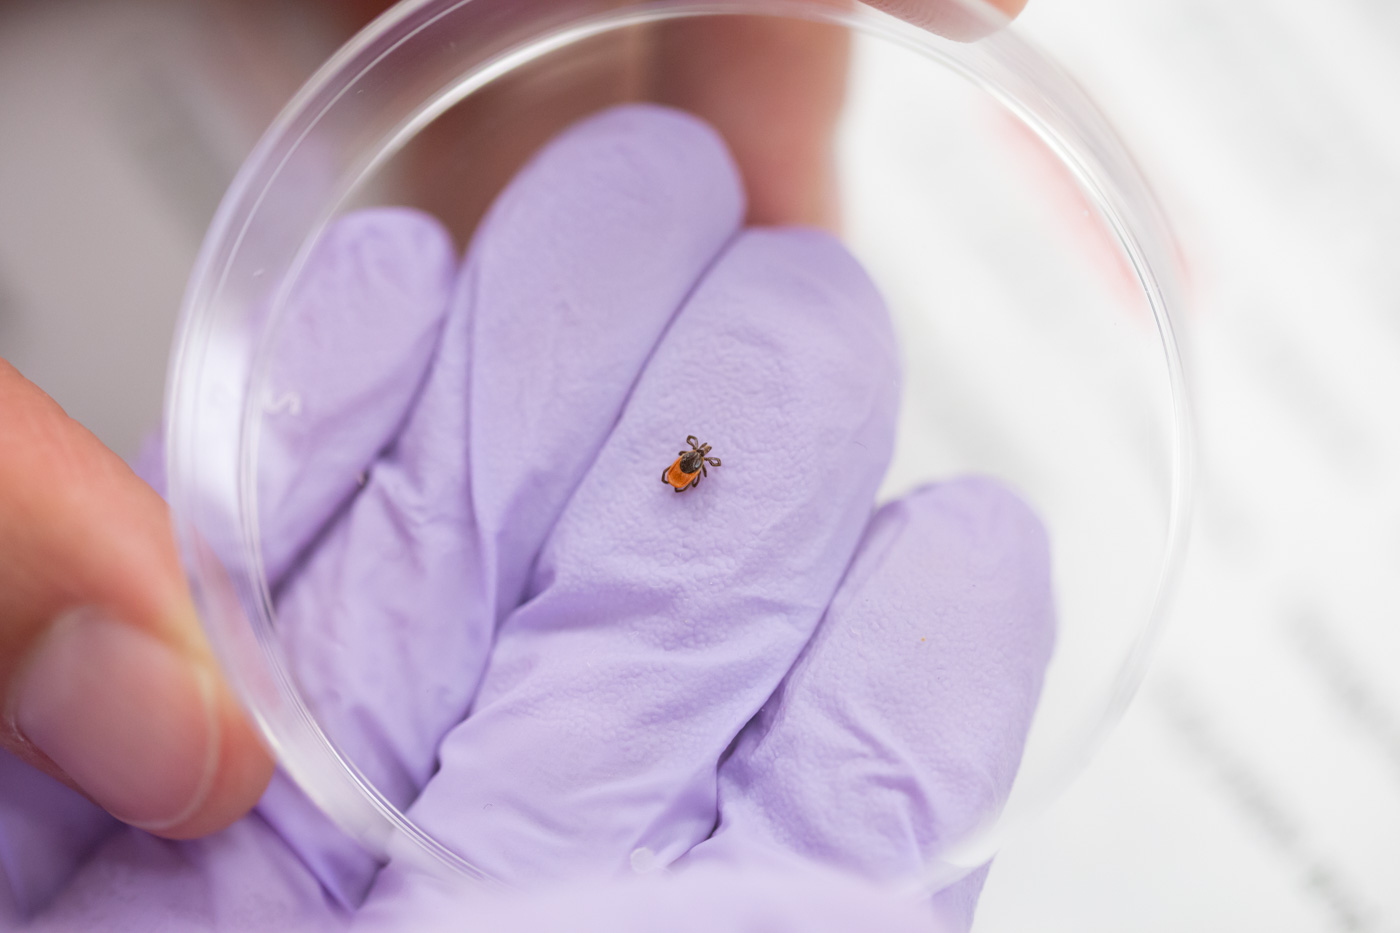 An integrated approach to Lyme disease